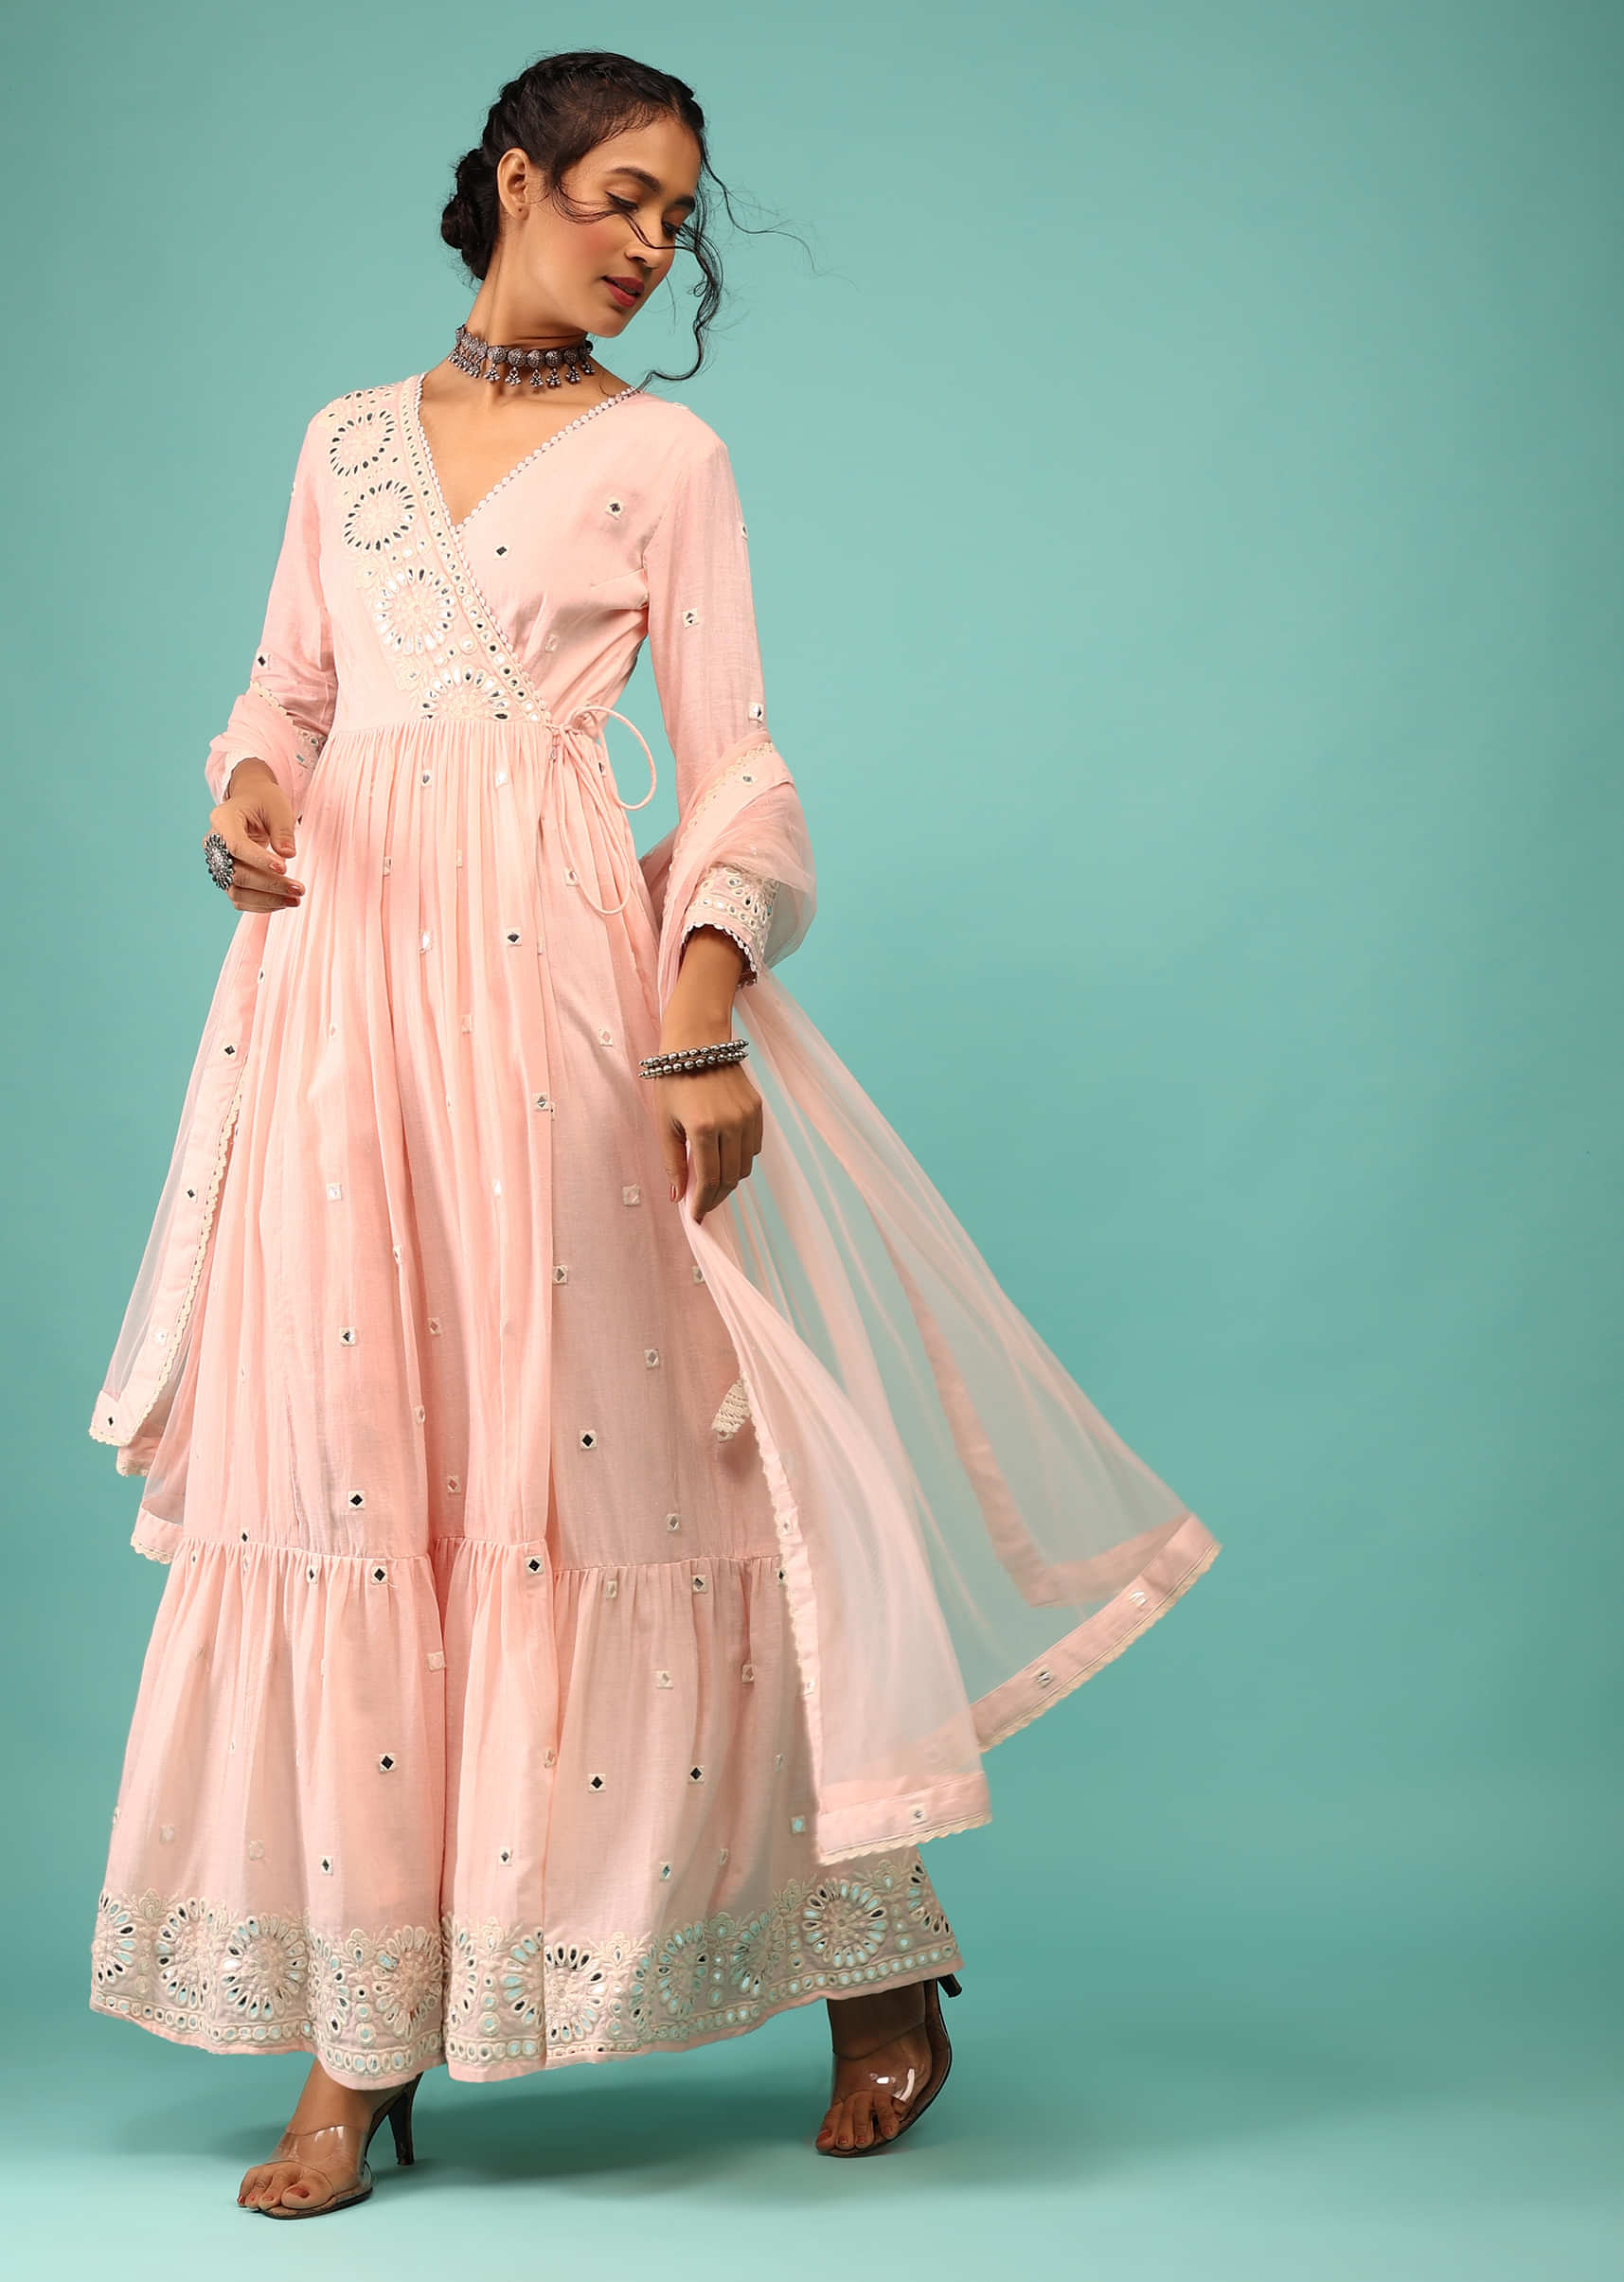 Candy Pink Anarkali Kurta In Floral Lucknowi Embroidery With Angrakha Pattern & Surplice Neckline